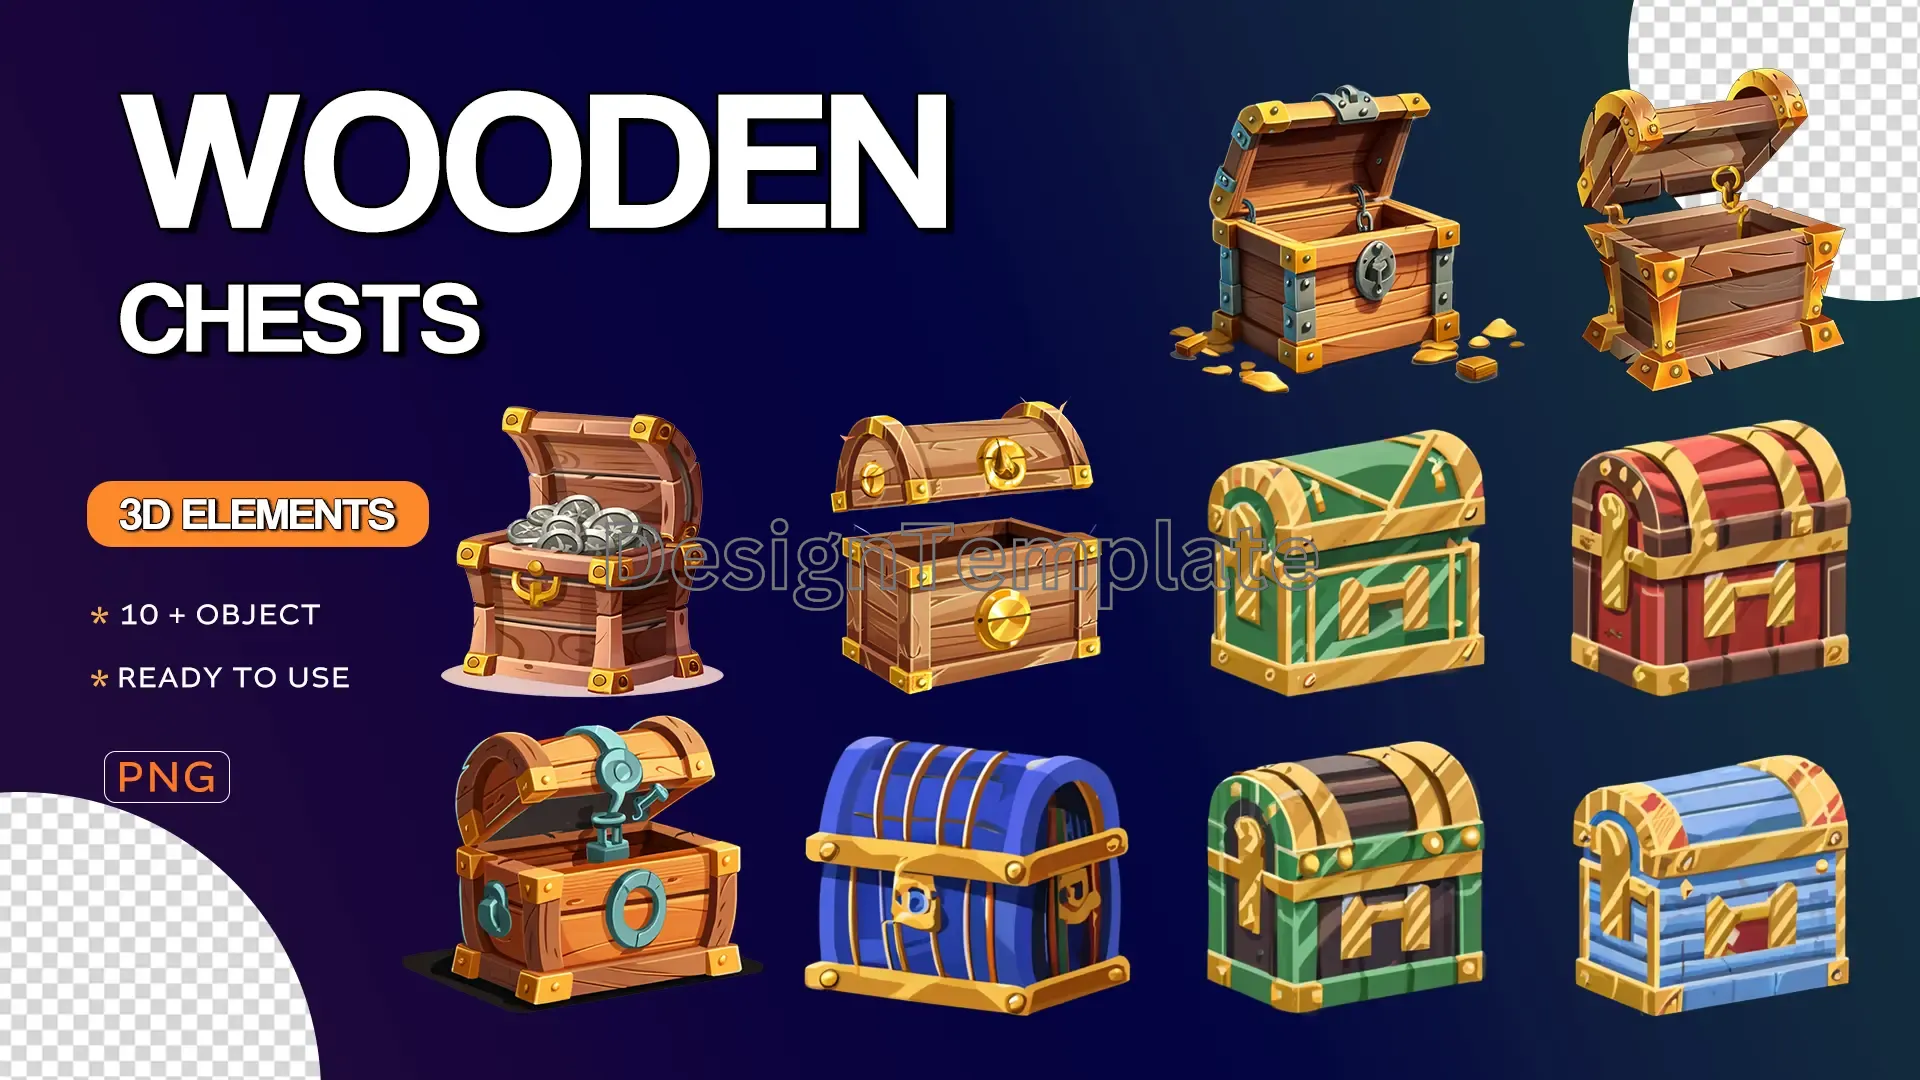 Treasure Trove Exquisite Wooden Chests 3D Elements Pack image